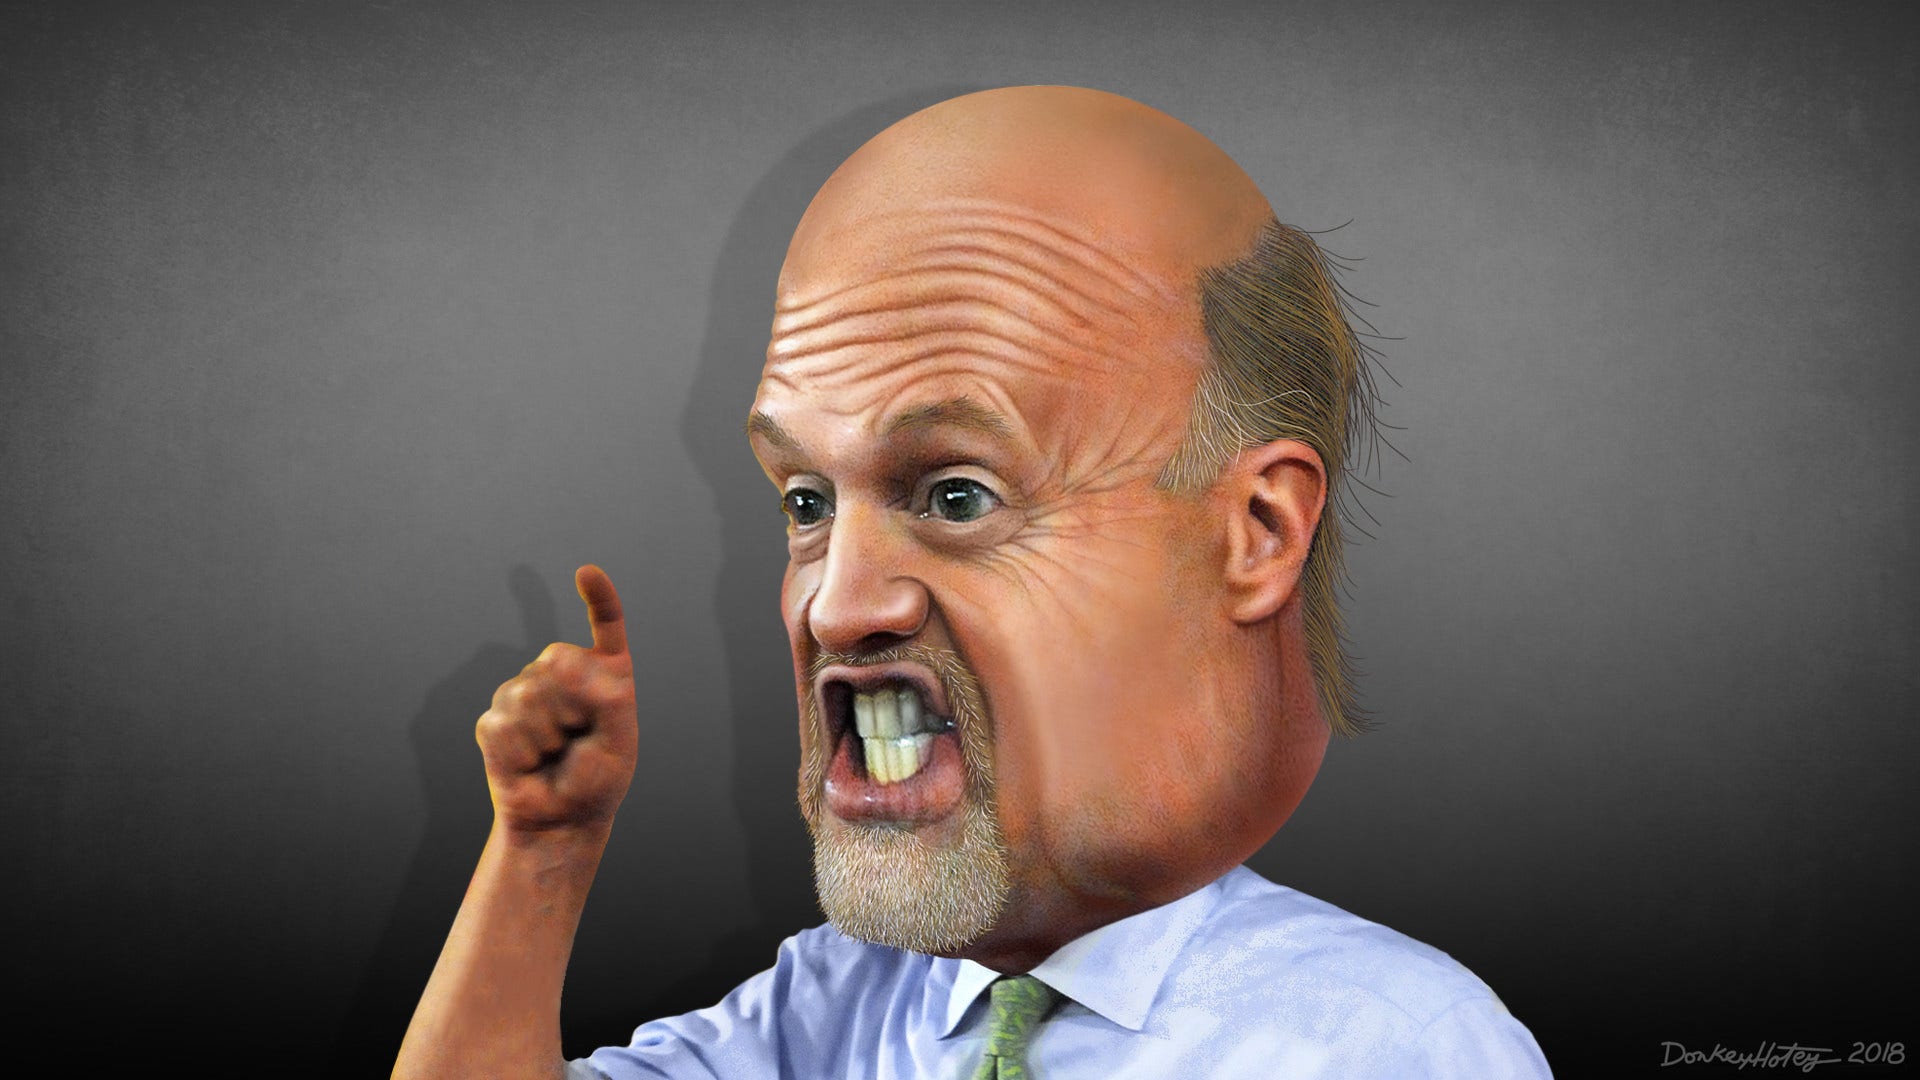 Jim Cramer Says Crypto Is A 'Gigantic Con': Why He Sold Bitcoin, Ethereum Near The Top